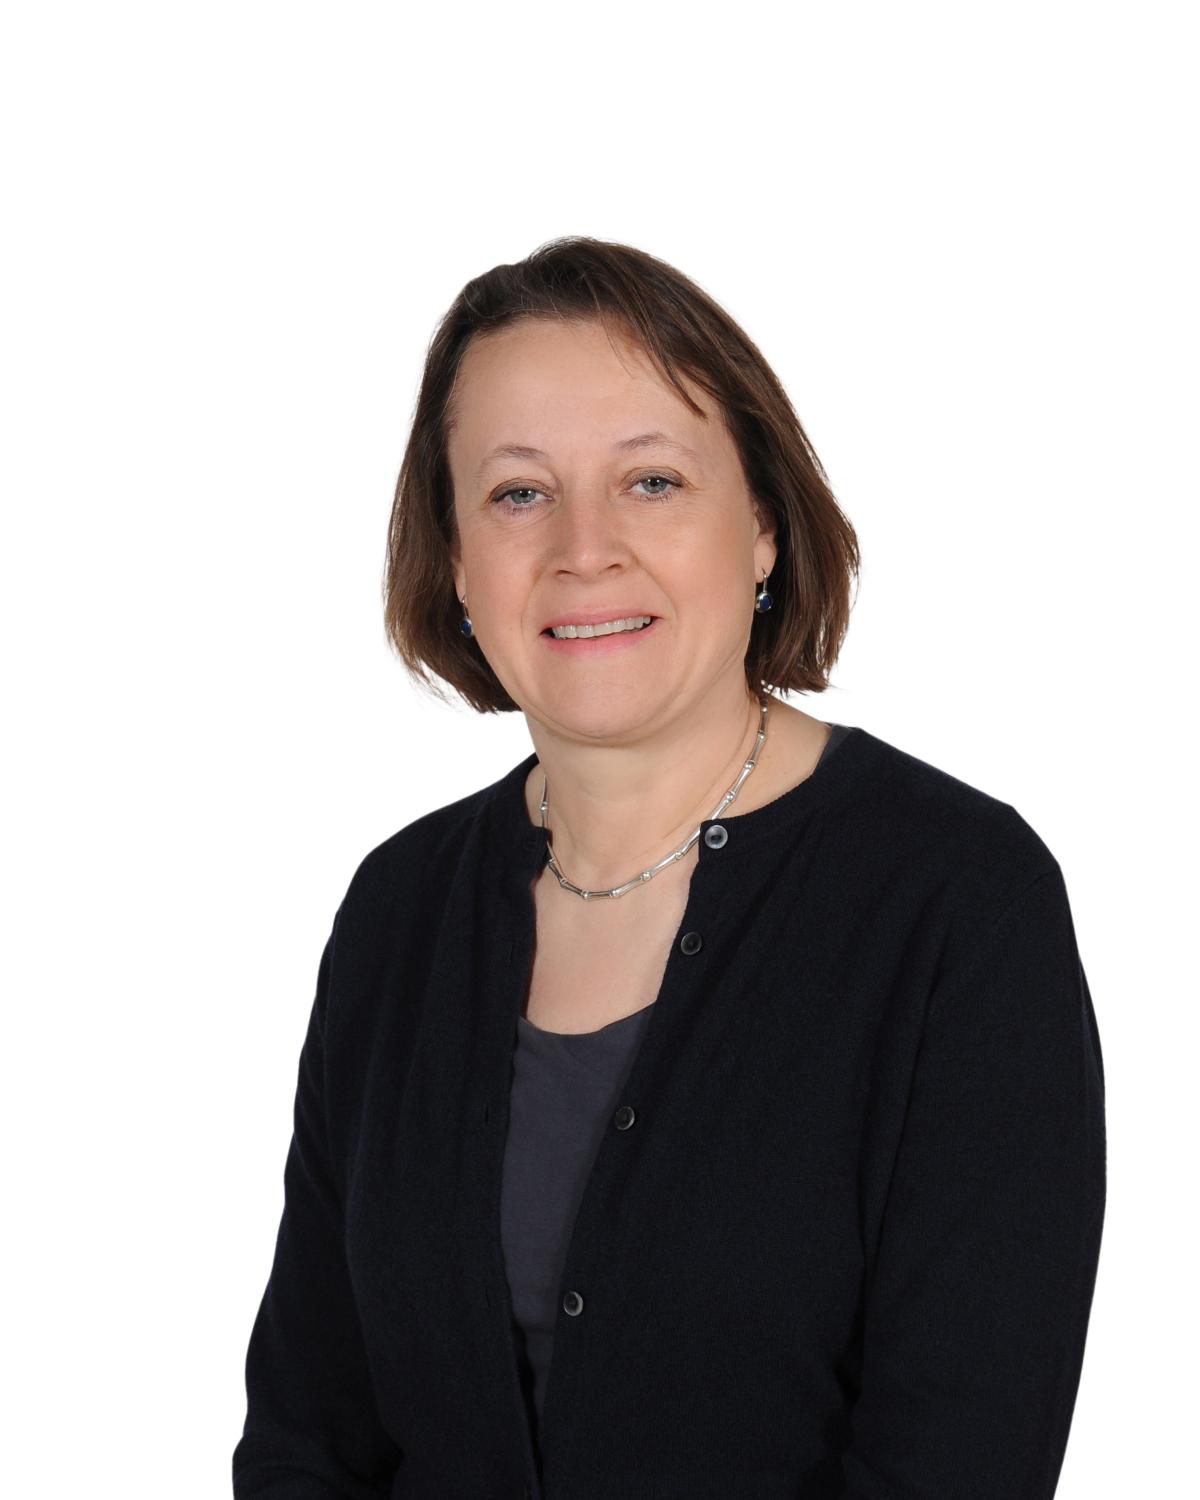 Louise Stead, Partner Member for NHS Trusts and Foundation Trusts